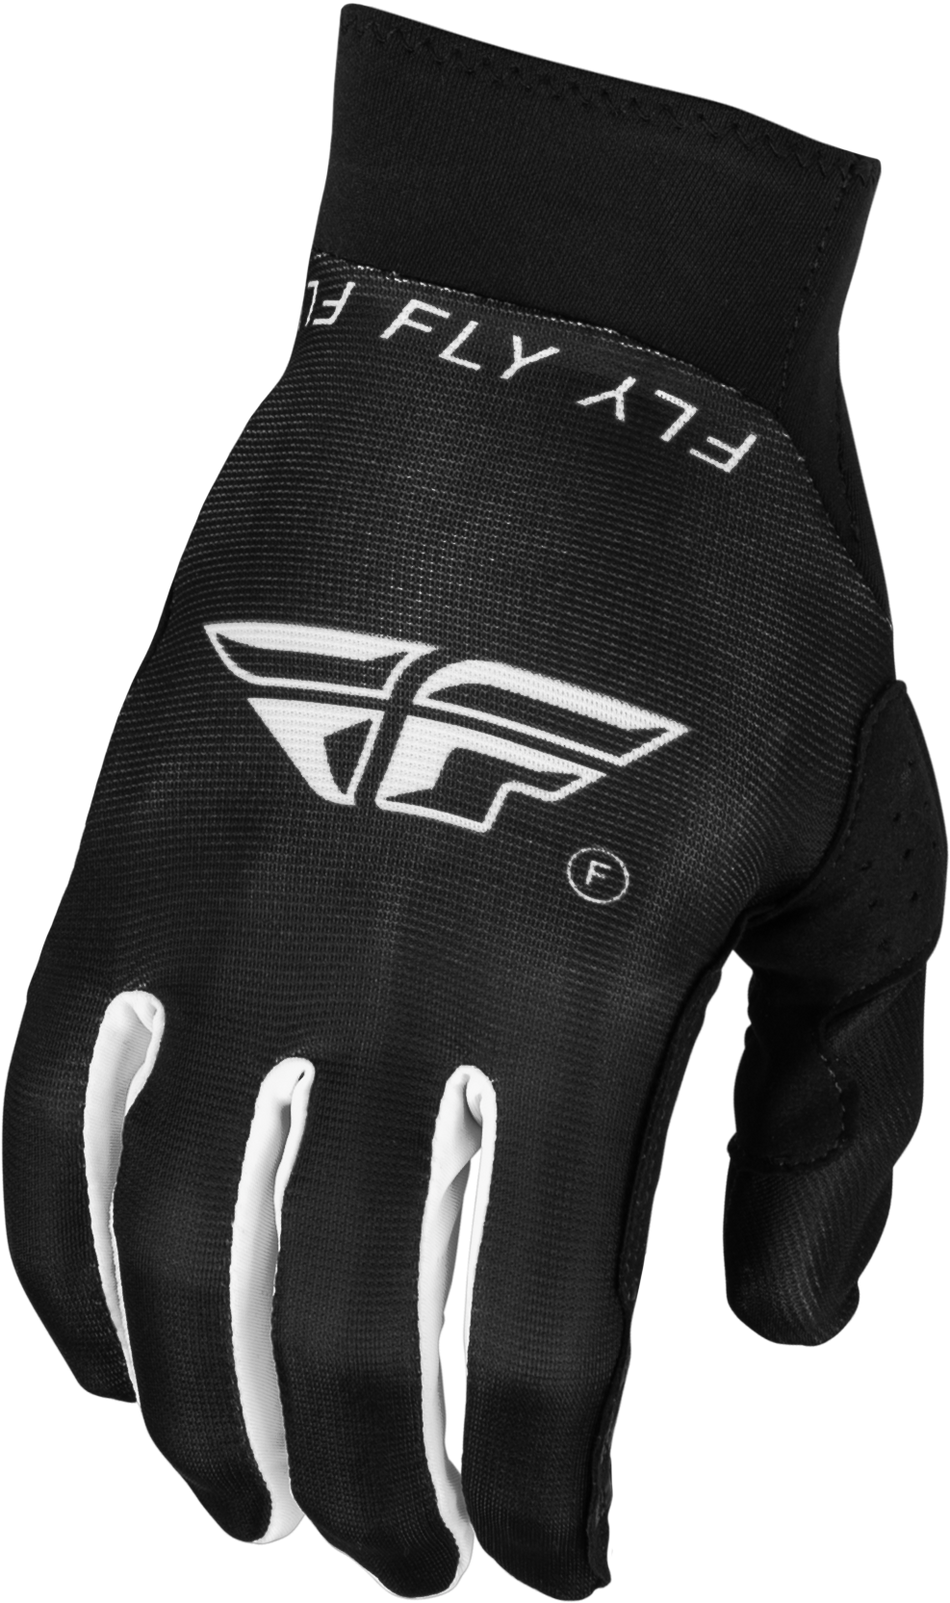 FLY RACING Youth Pro Lite Gloves Black/White Yl 377-040YL